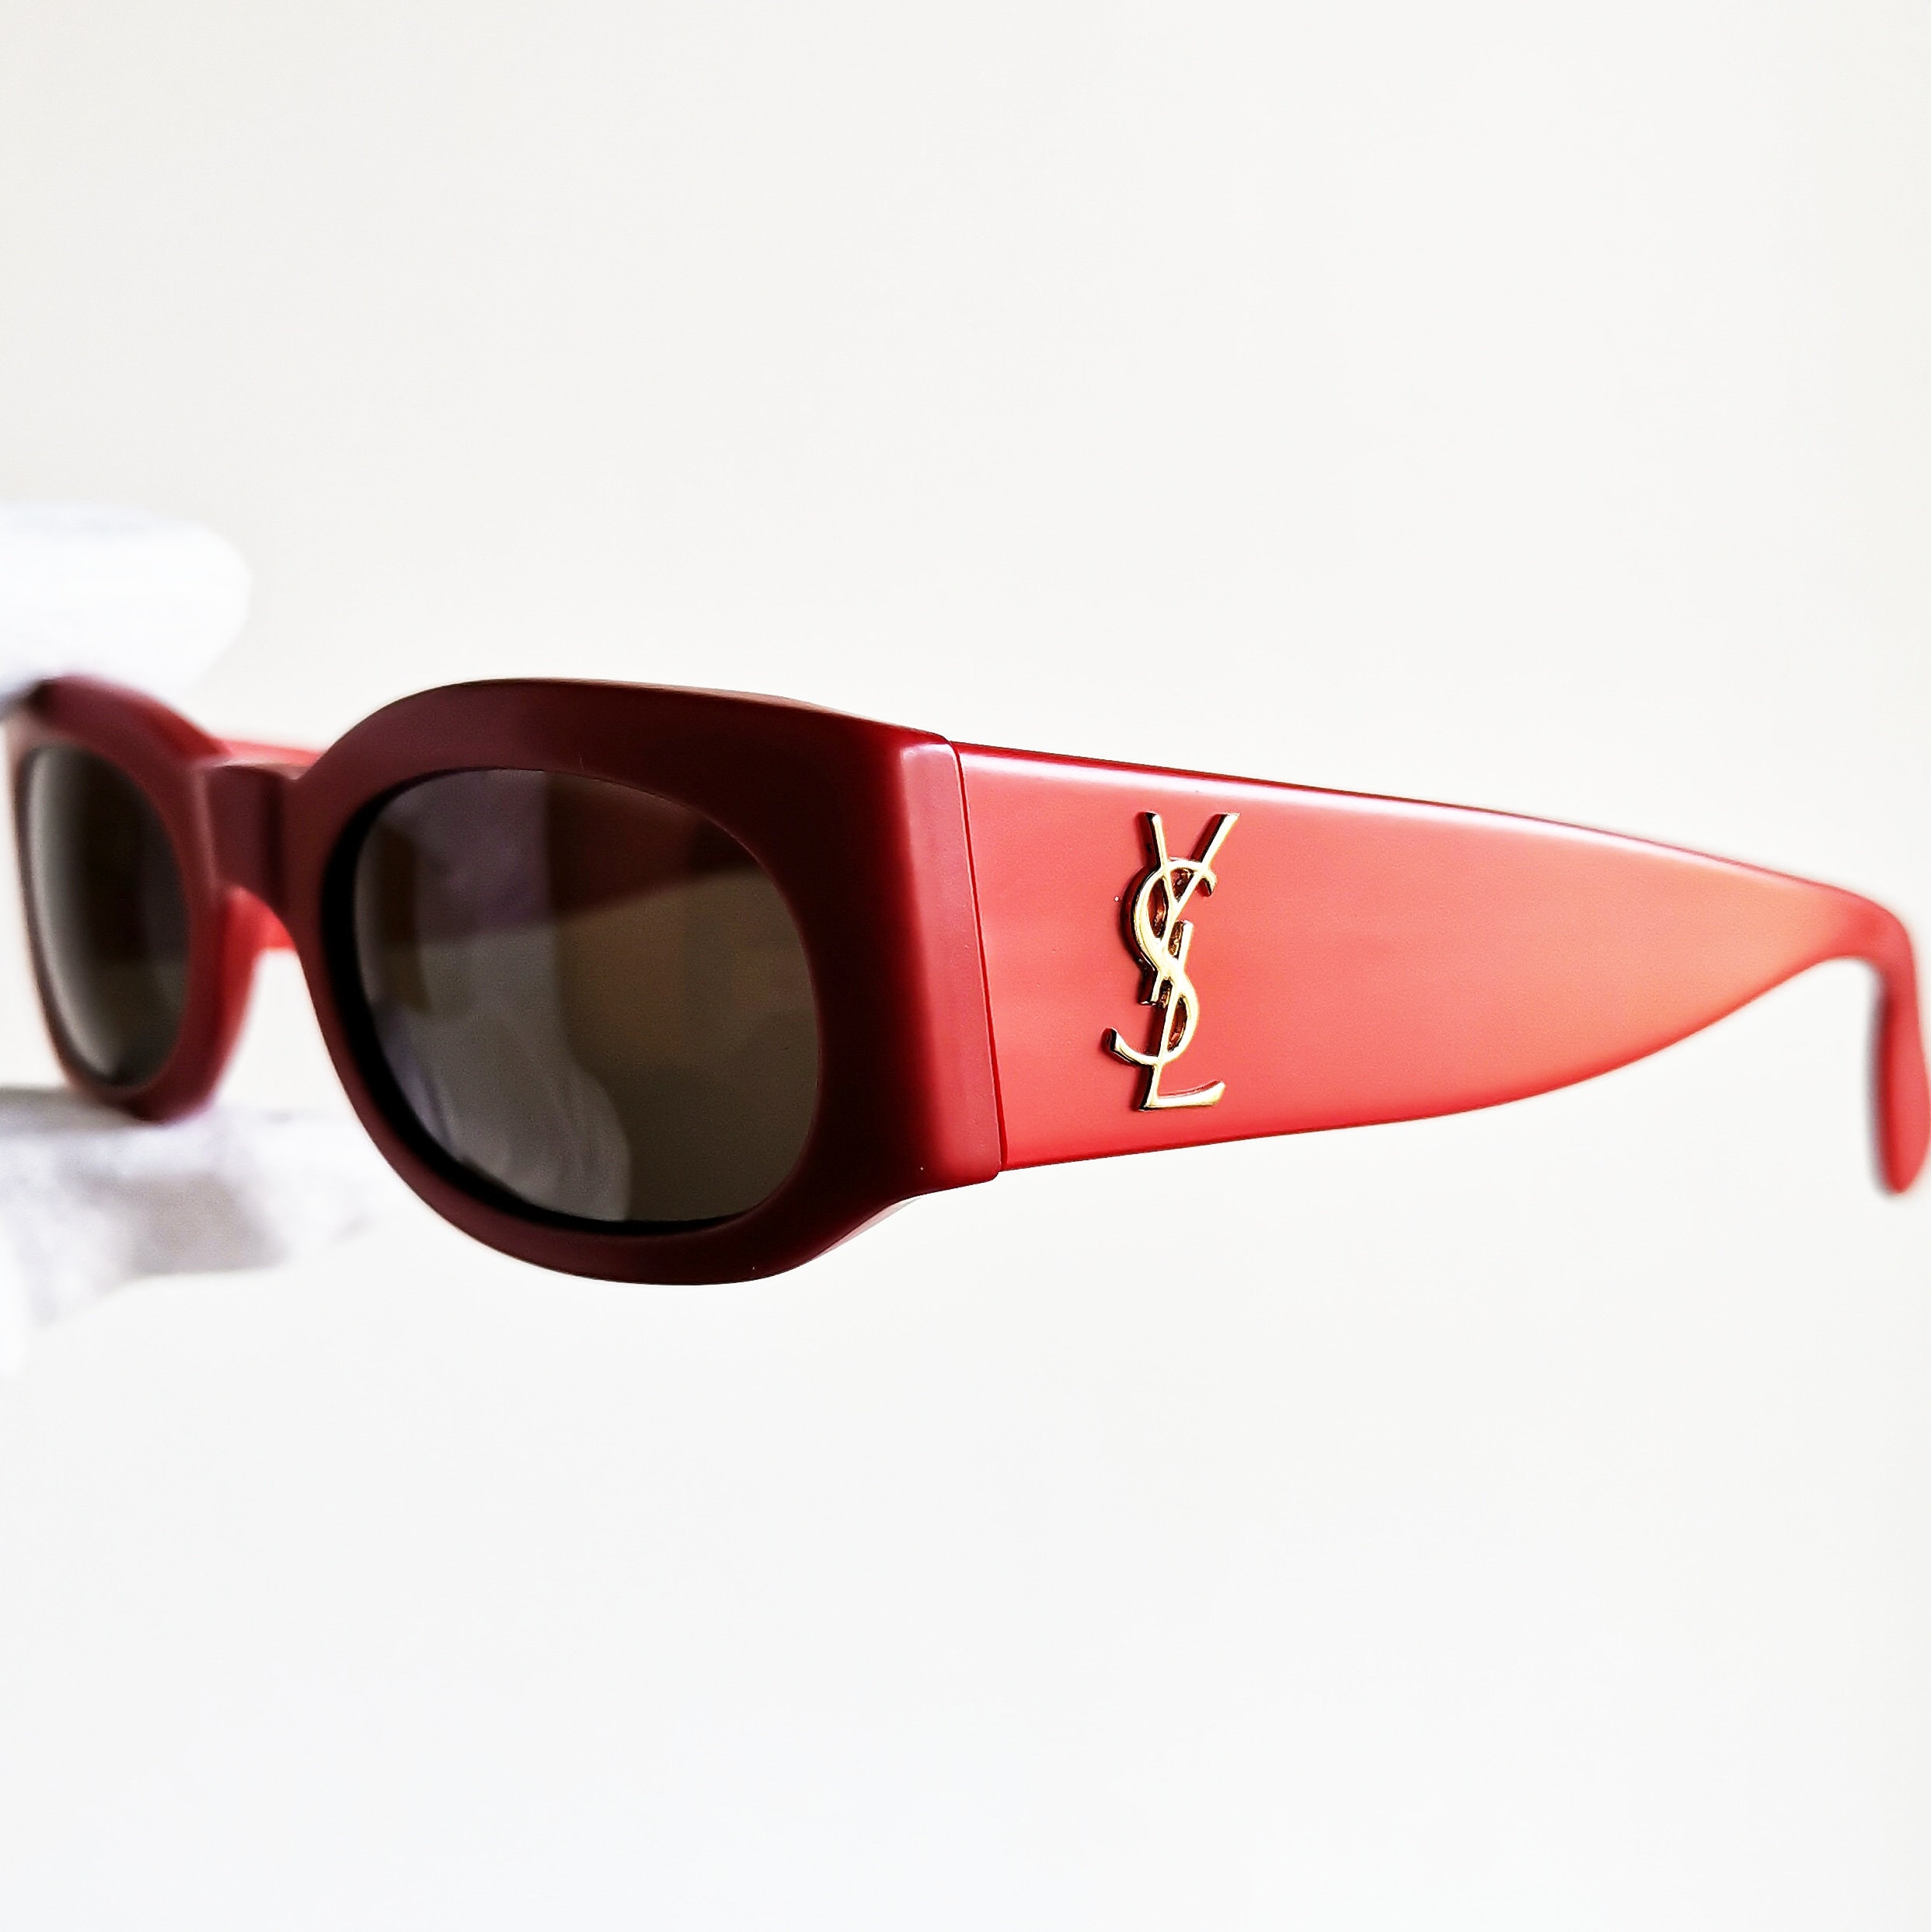 YVES SAINT LAURENT Vintage Sunglasses Rare Ysl Red Oval 6545 -  Norway